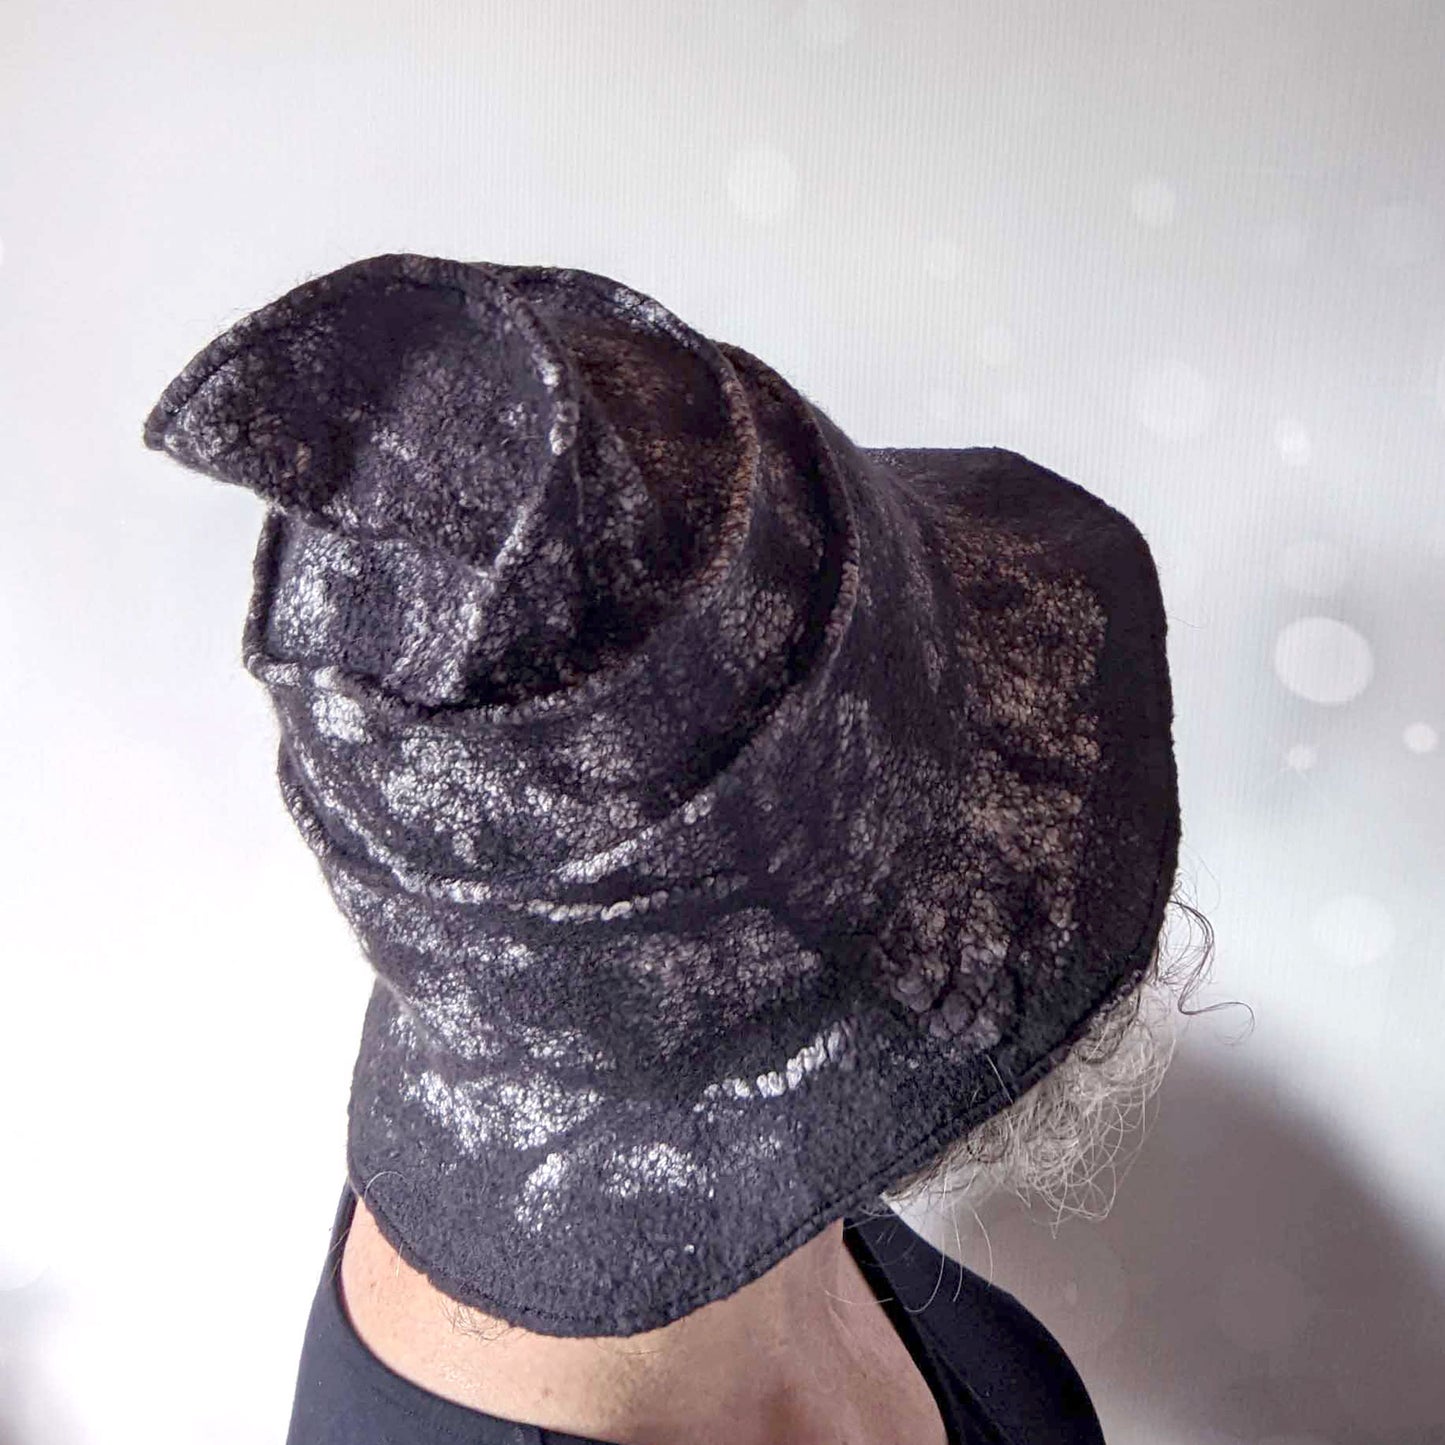 Nunofelted Black Hat with Brim and Organic Shaped Tip - backview